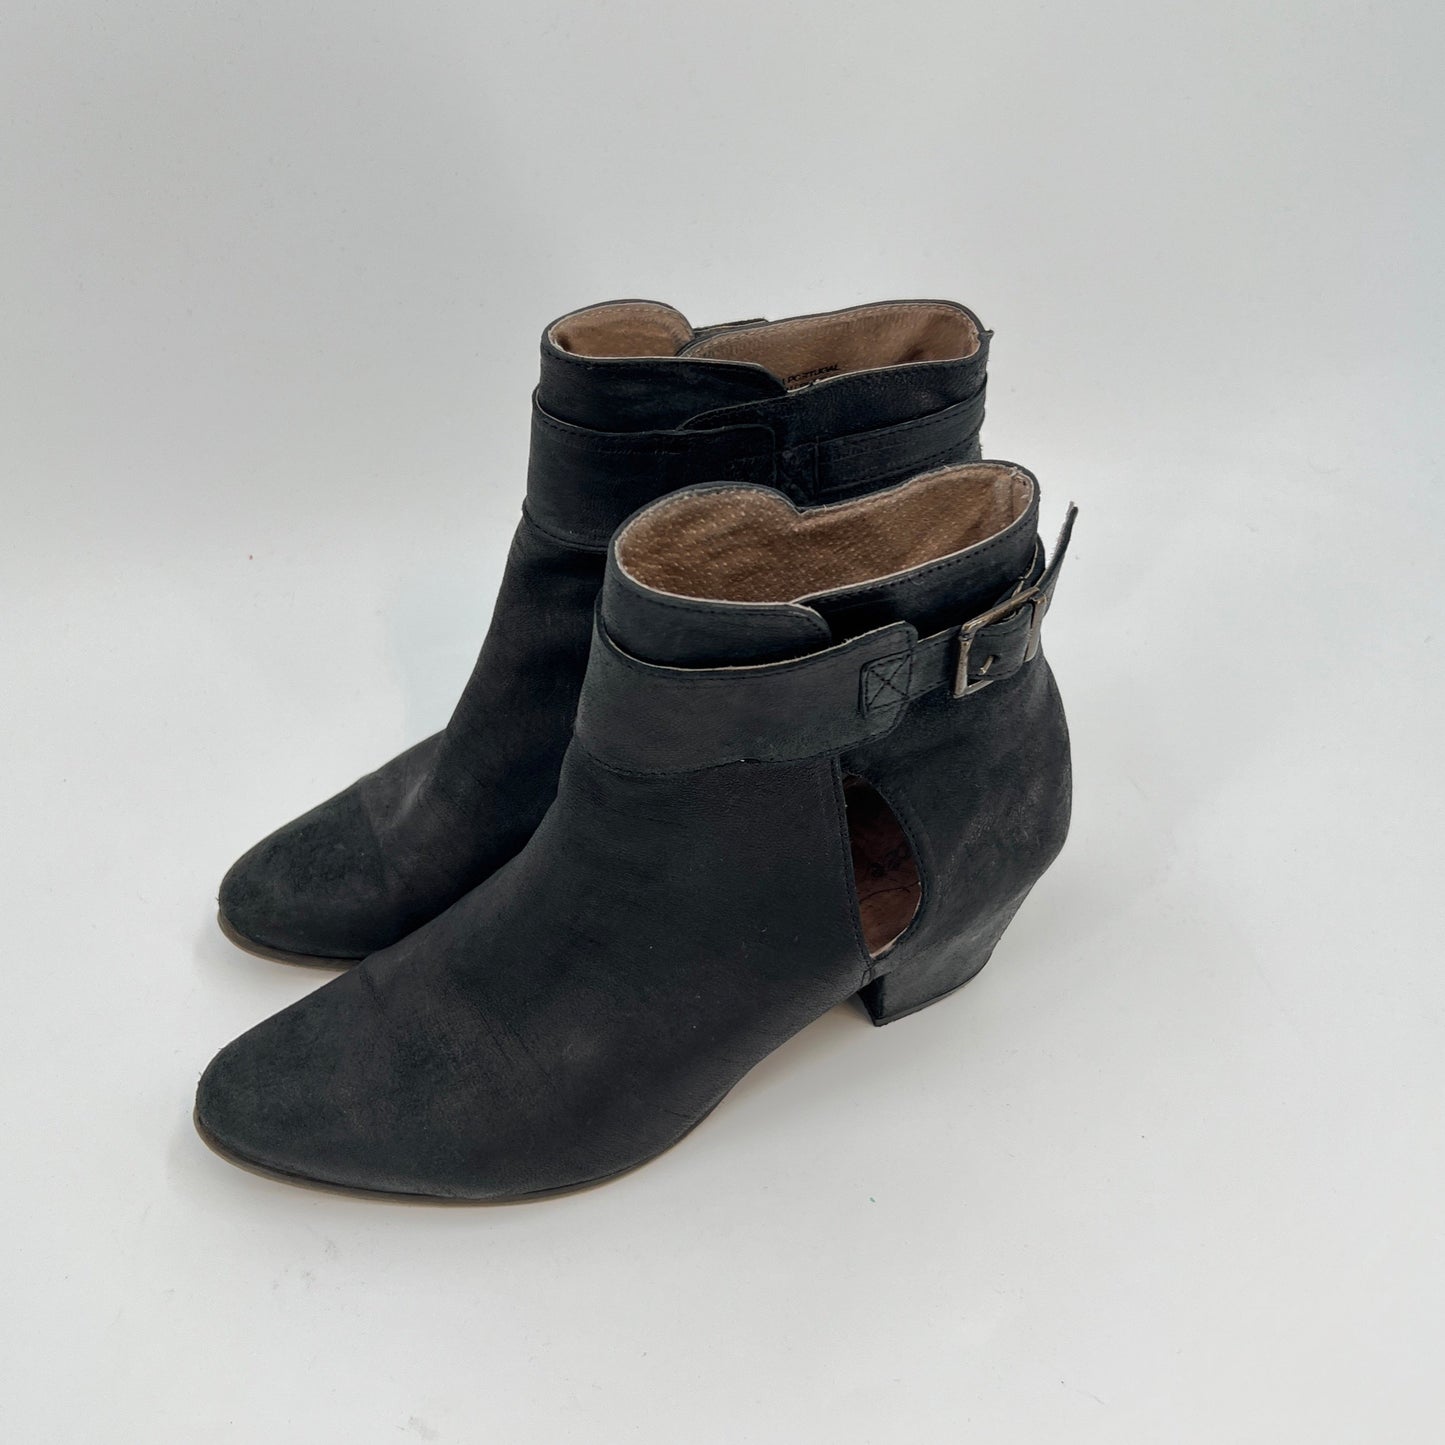 SOLD. Free People Ankle Booties 40EU